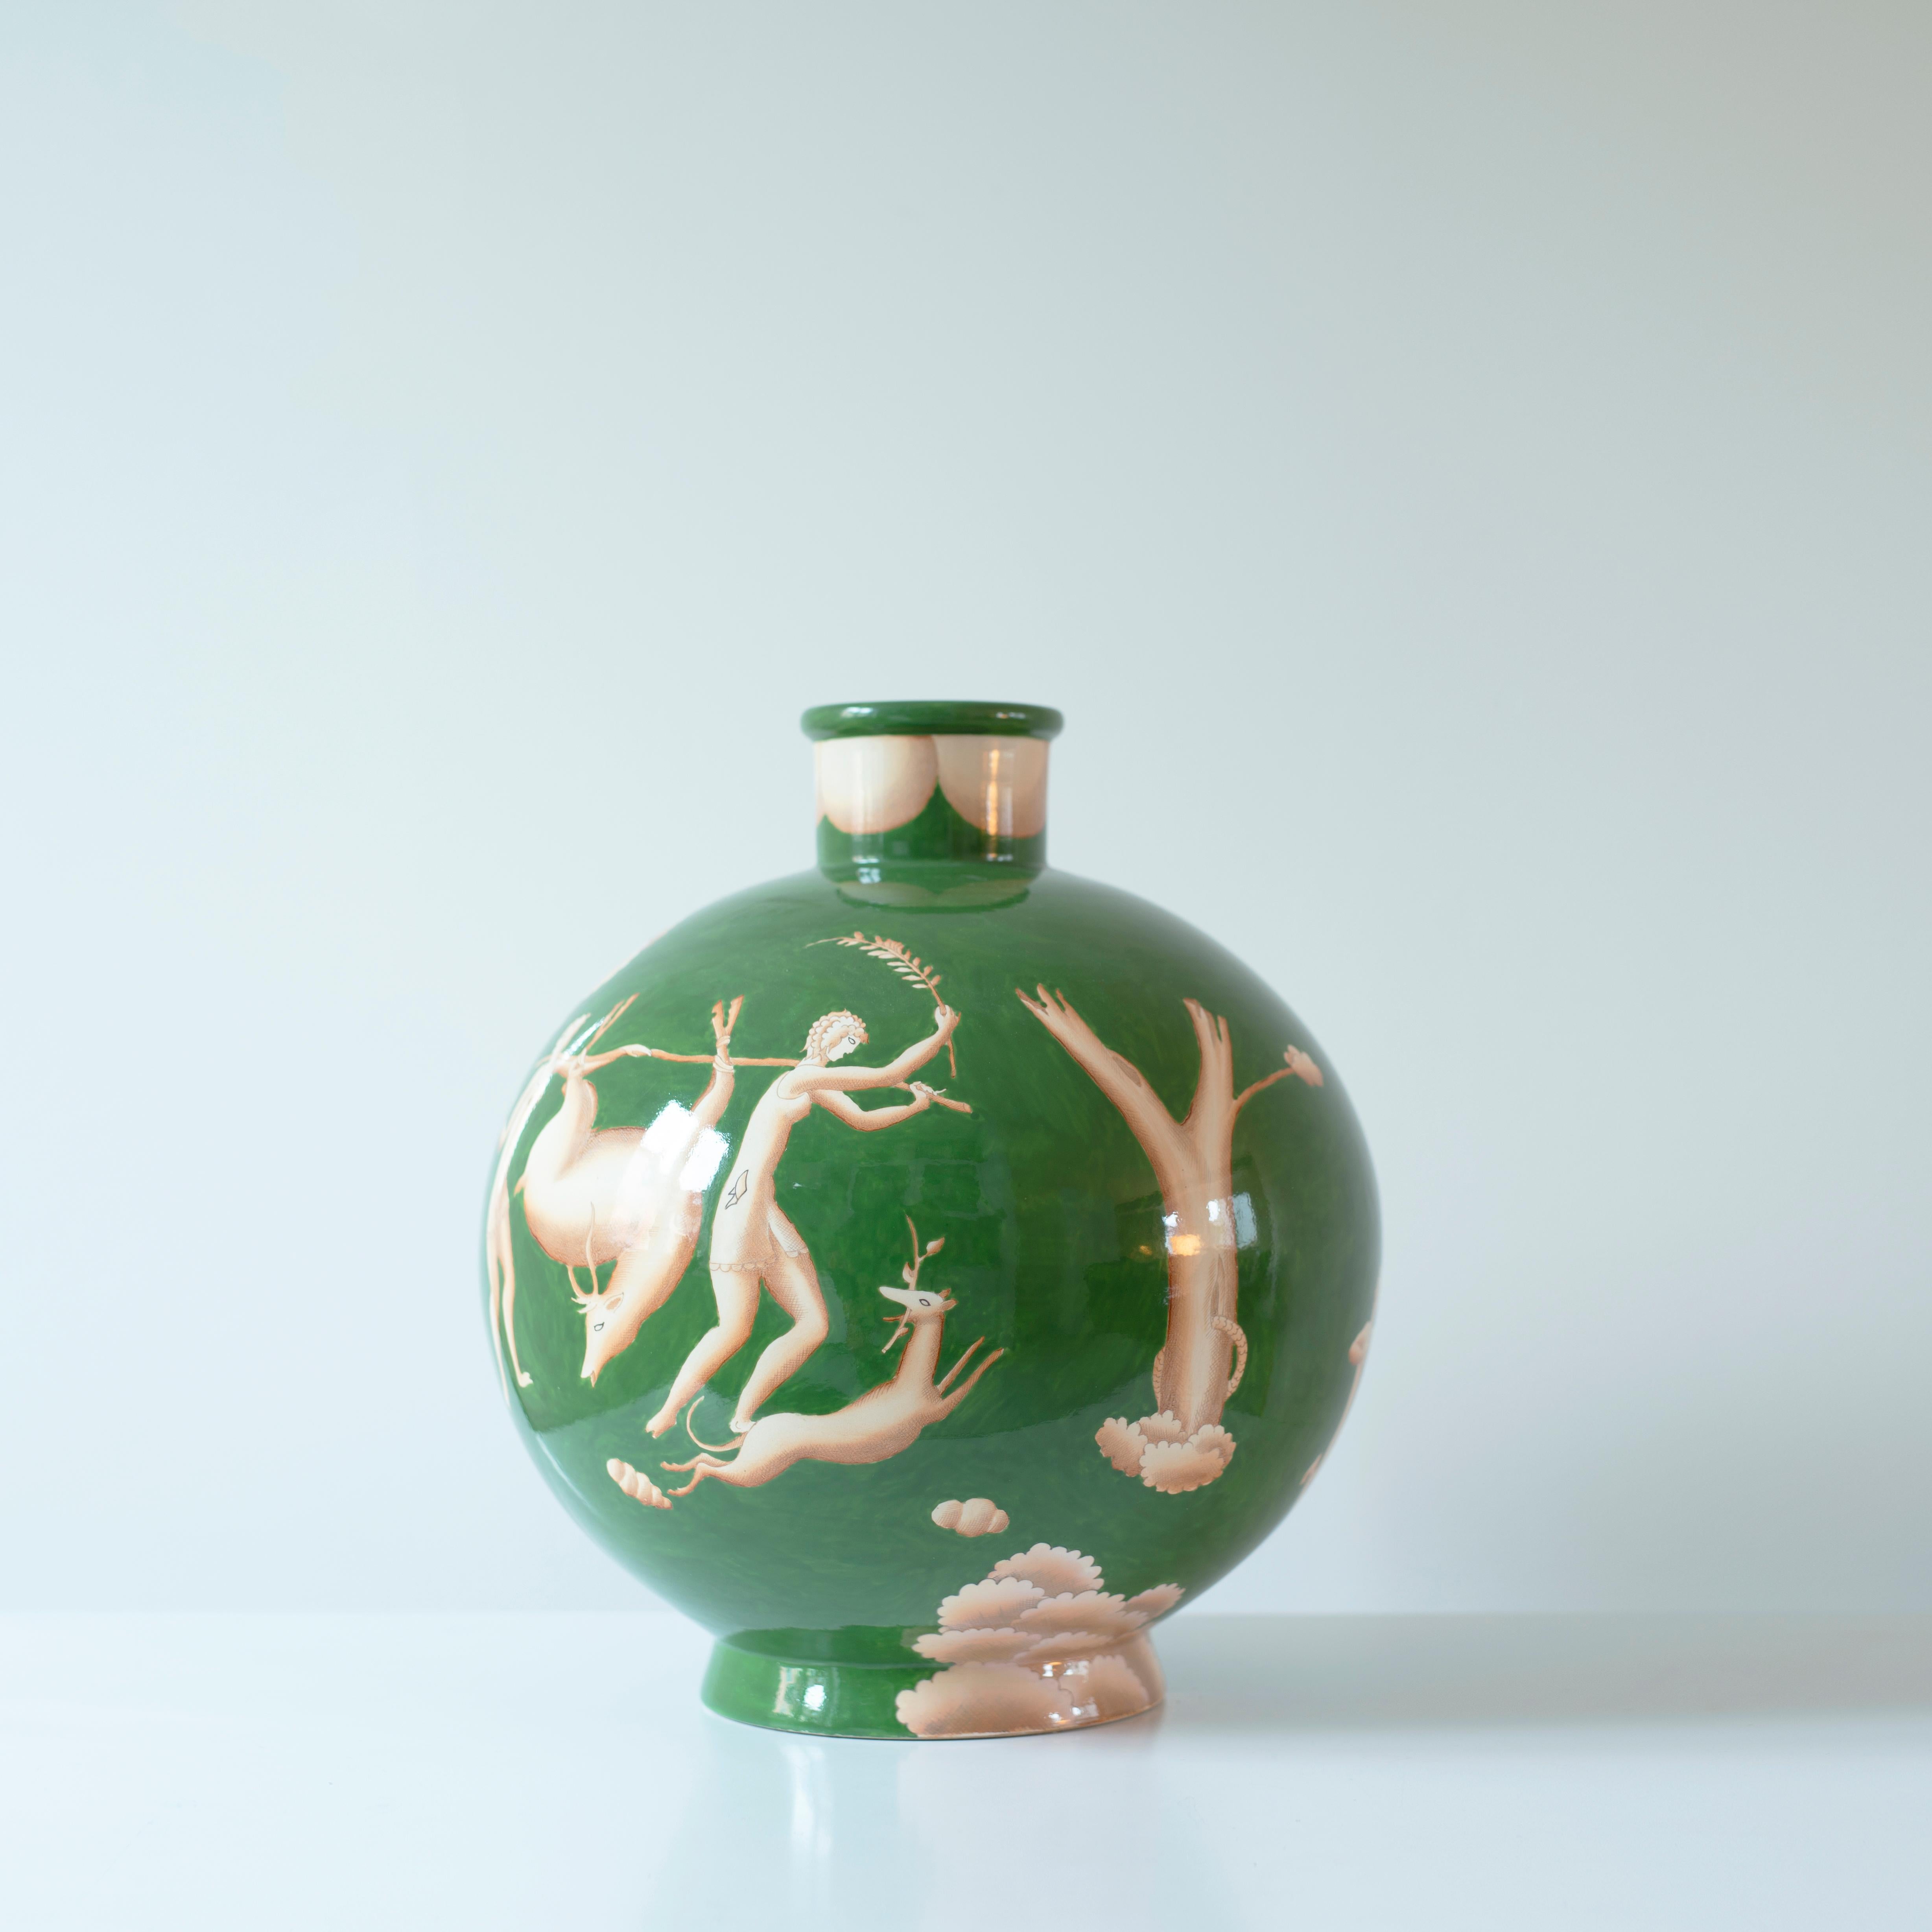 Gio Ponti (1891-1979) celebrates the Triumphs of the Amazons in the 1920s, in the period in which he lends his activity as designer for the Richard-Ginori Pottery Manufacture, reinventing the style of industrial design.

Gio Ponti as one of the